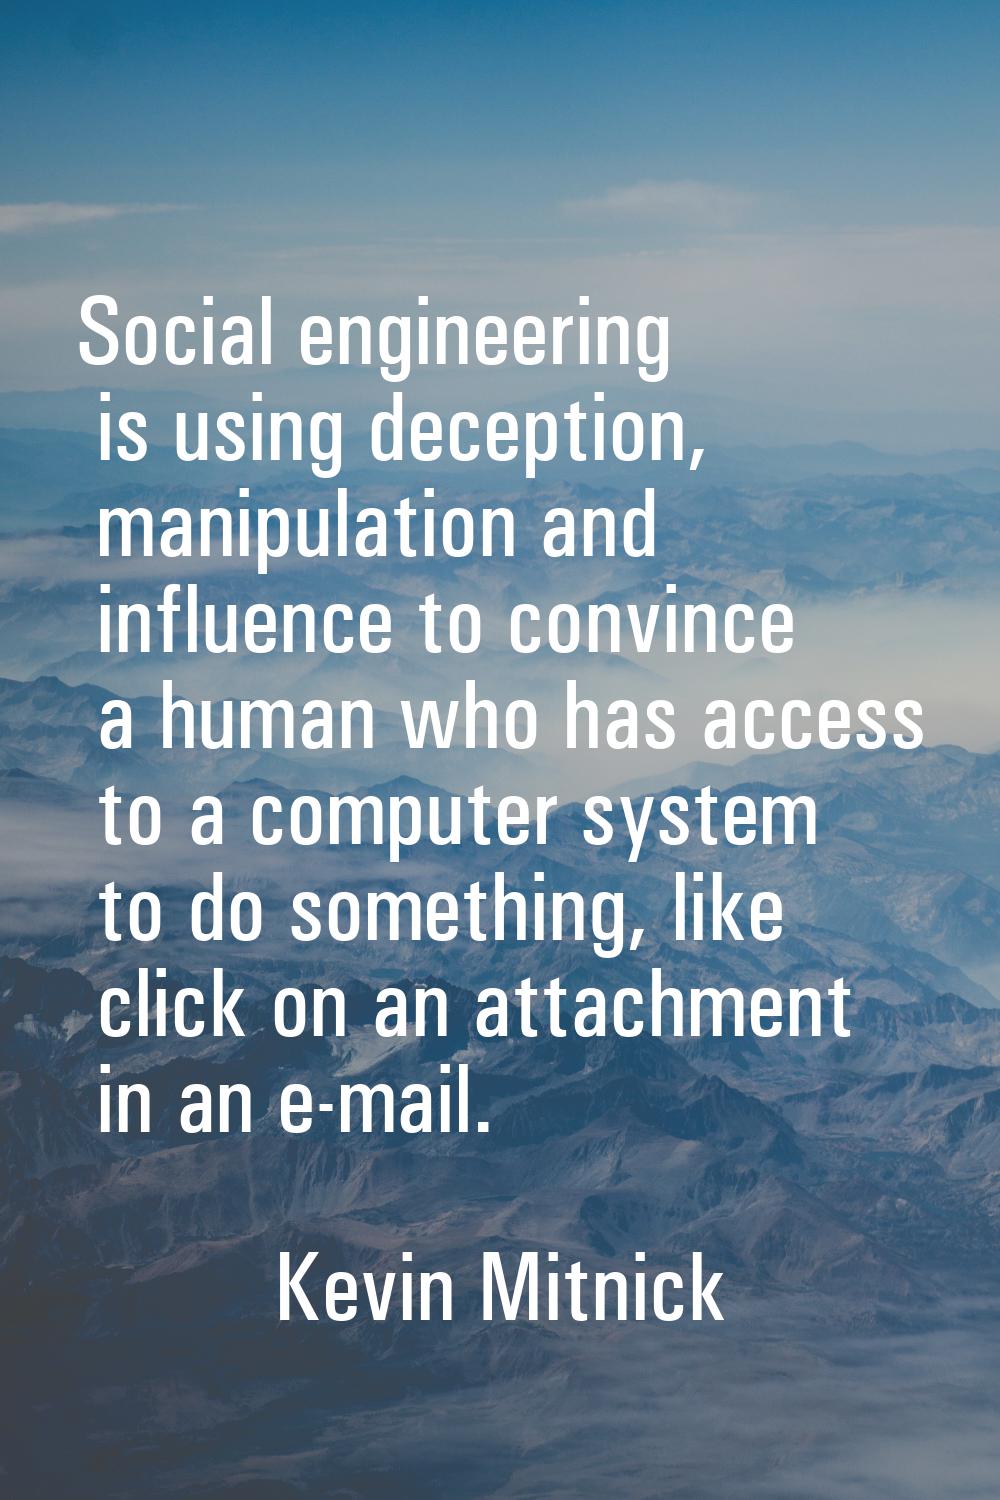 Social engineering is using deception, manipulation and influence to convince a human who has acces